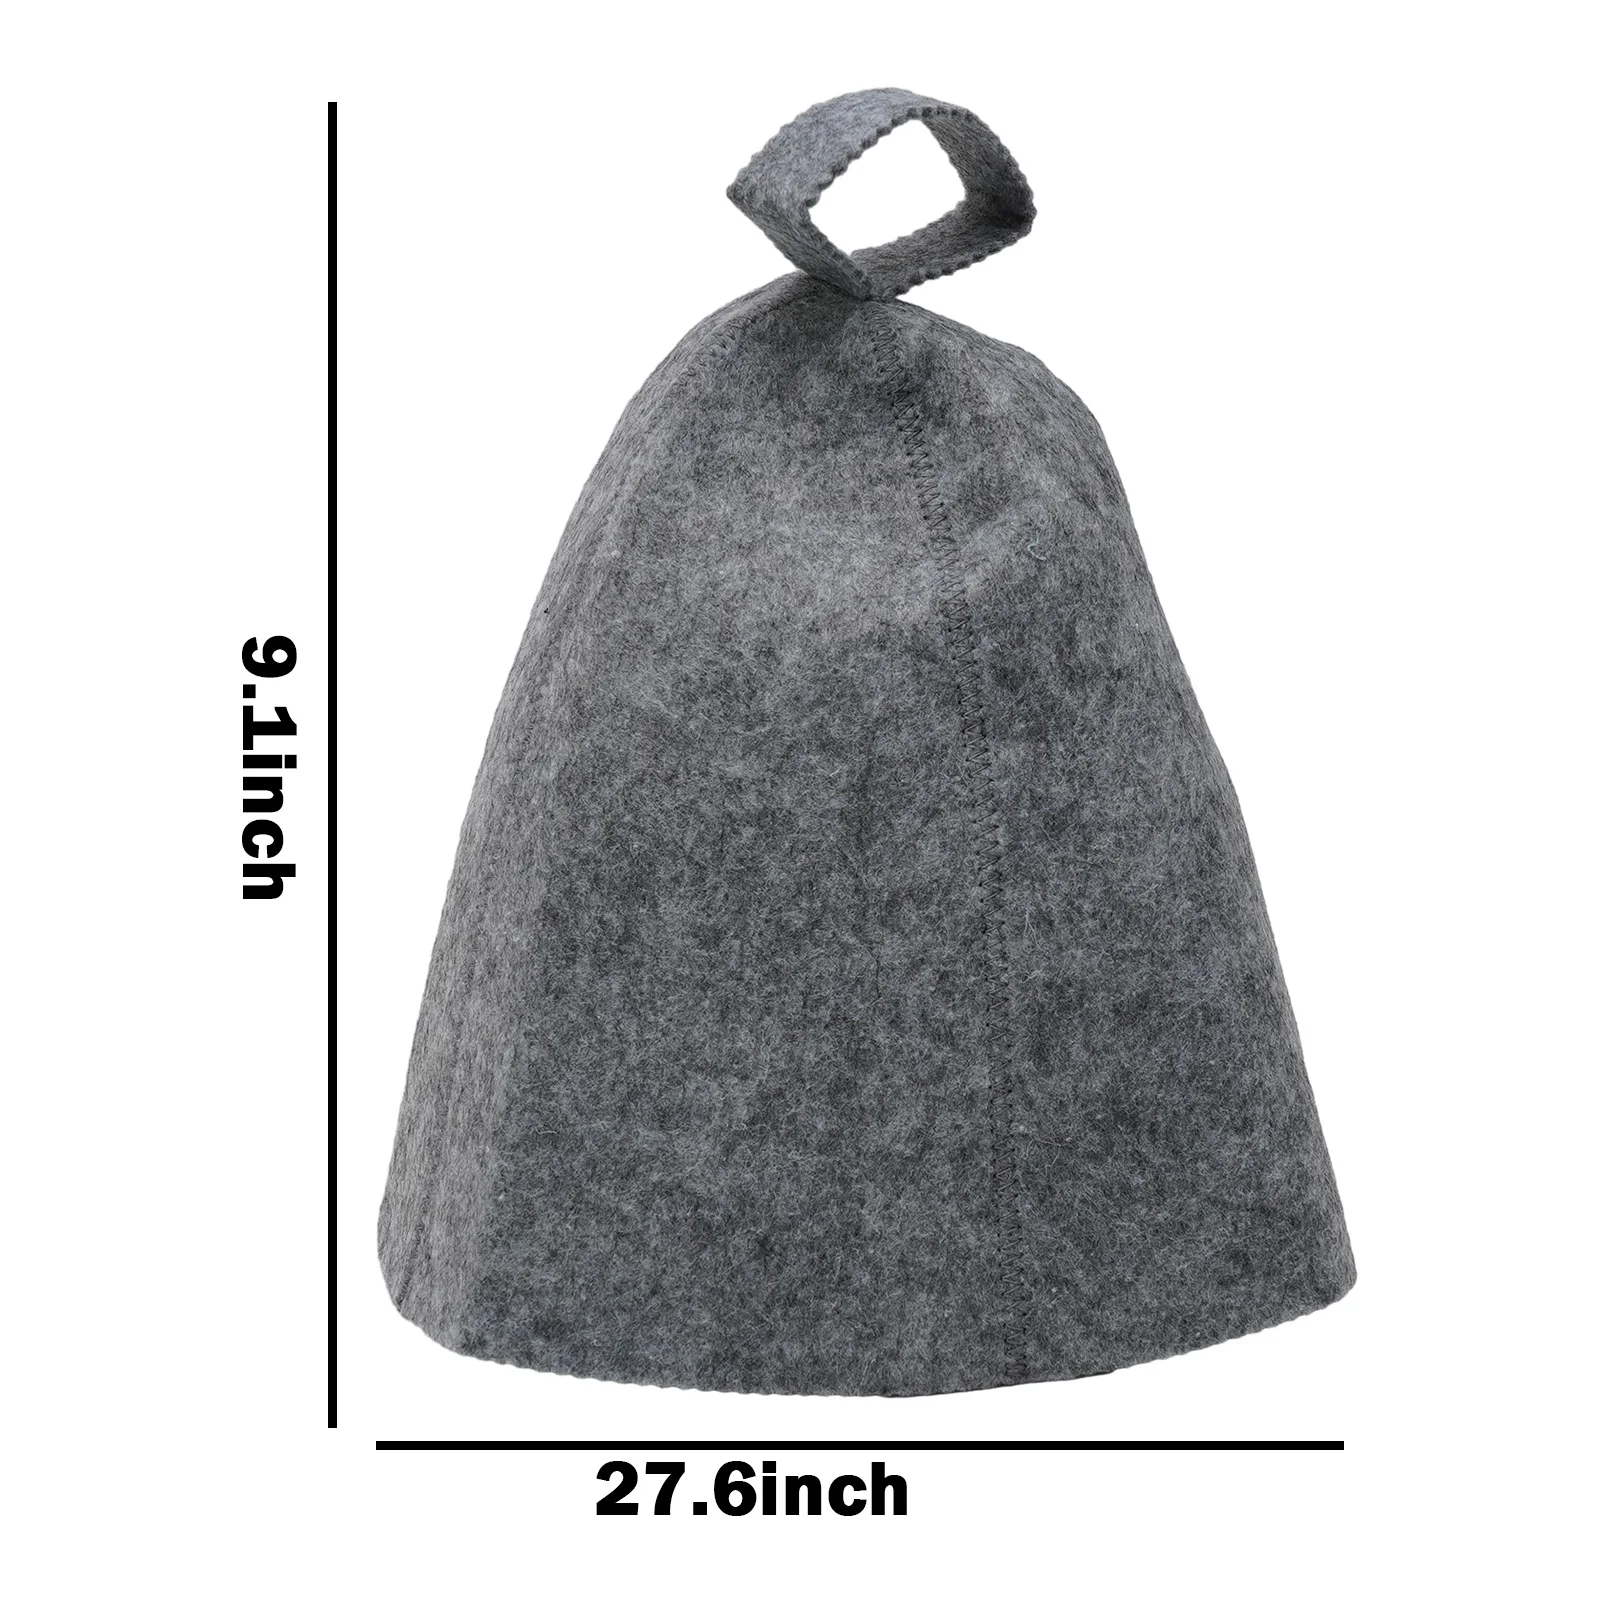 High Quality Practical Brand New Sauna Hat Wool Cap Anti Heat Protection Soft Solid Spa Bath With Hanging Loop